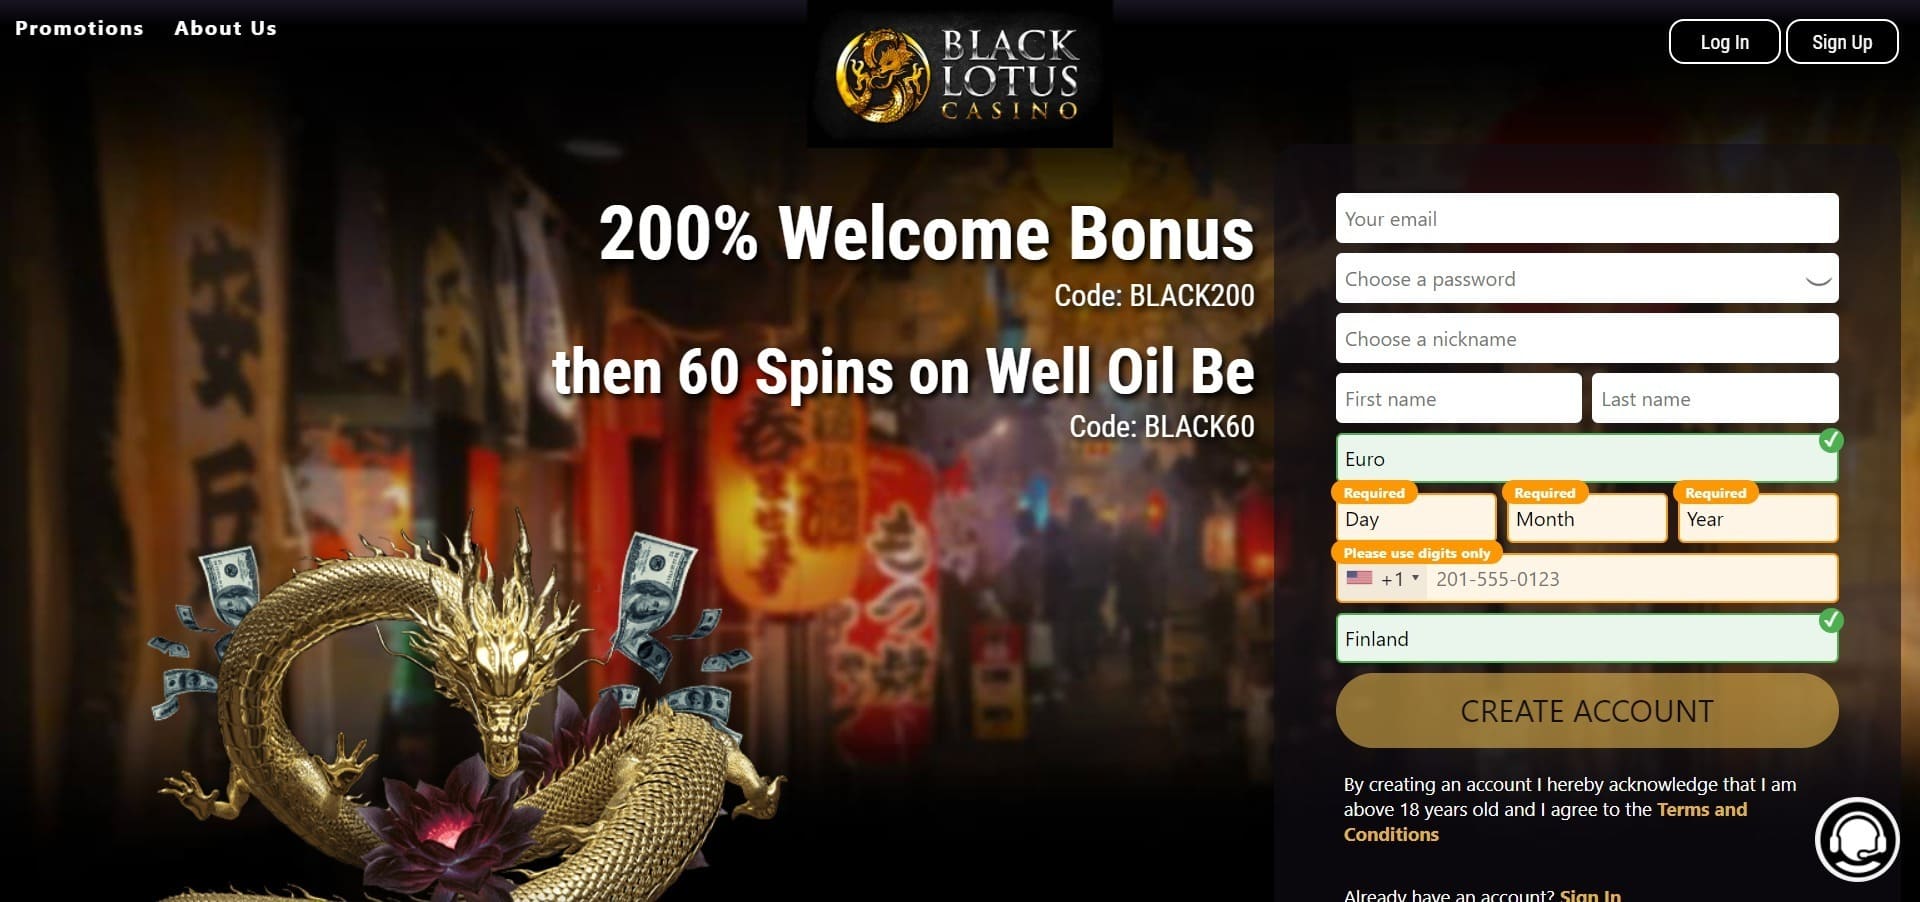 Official website of the Black Lotus Casino